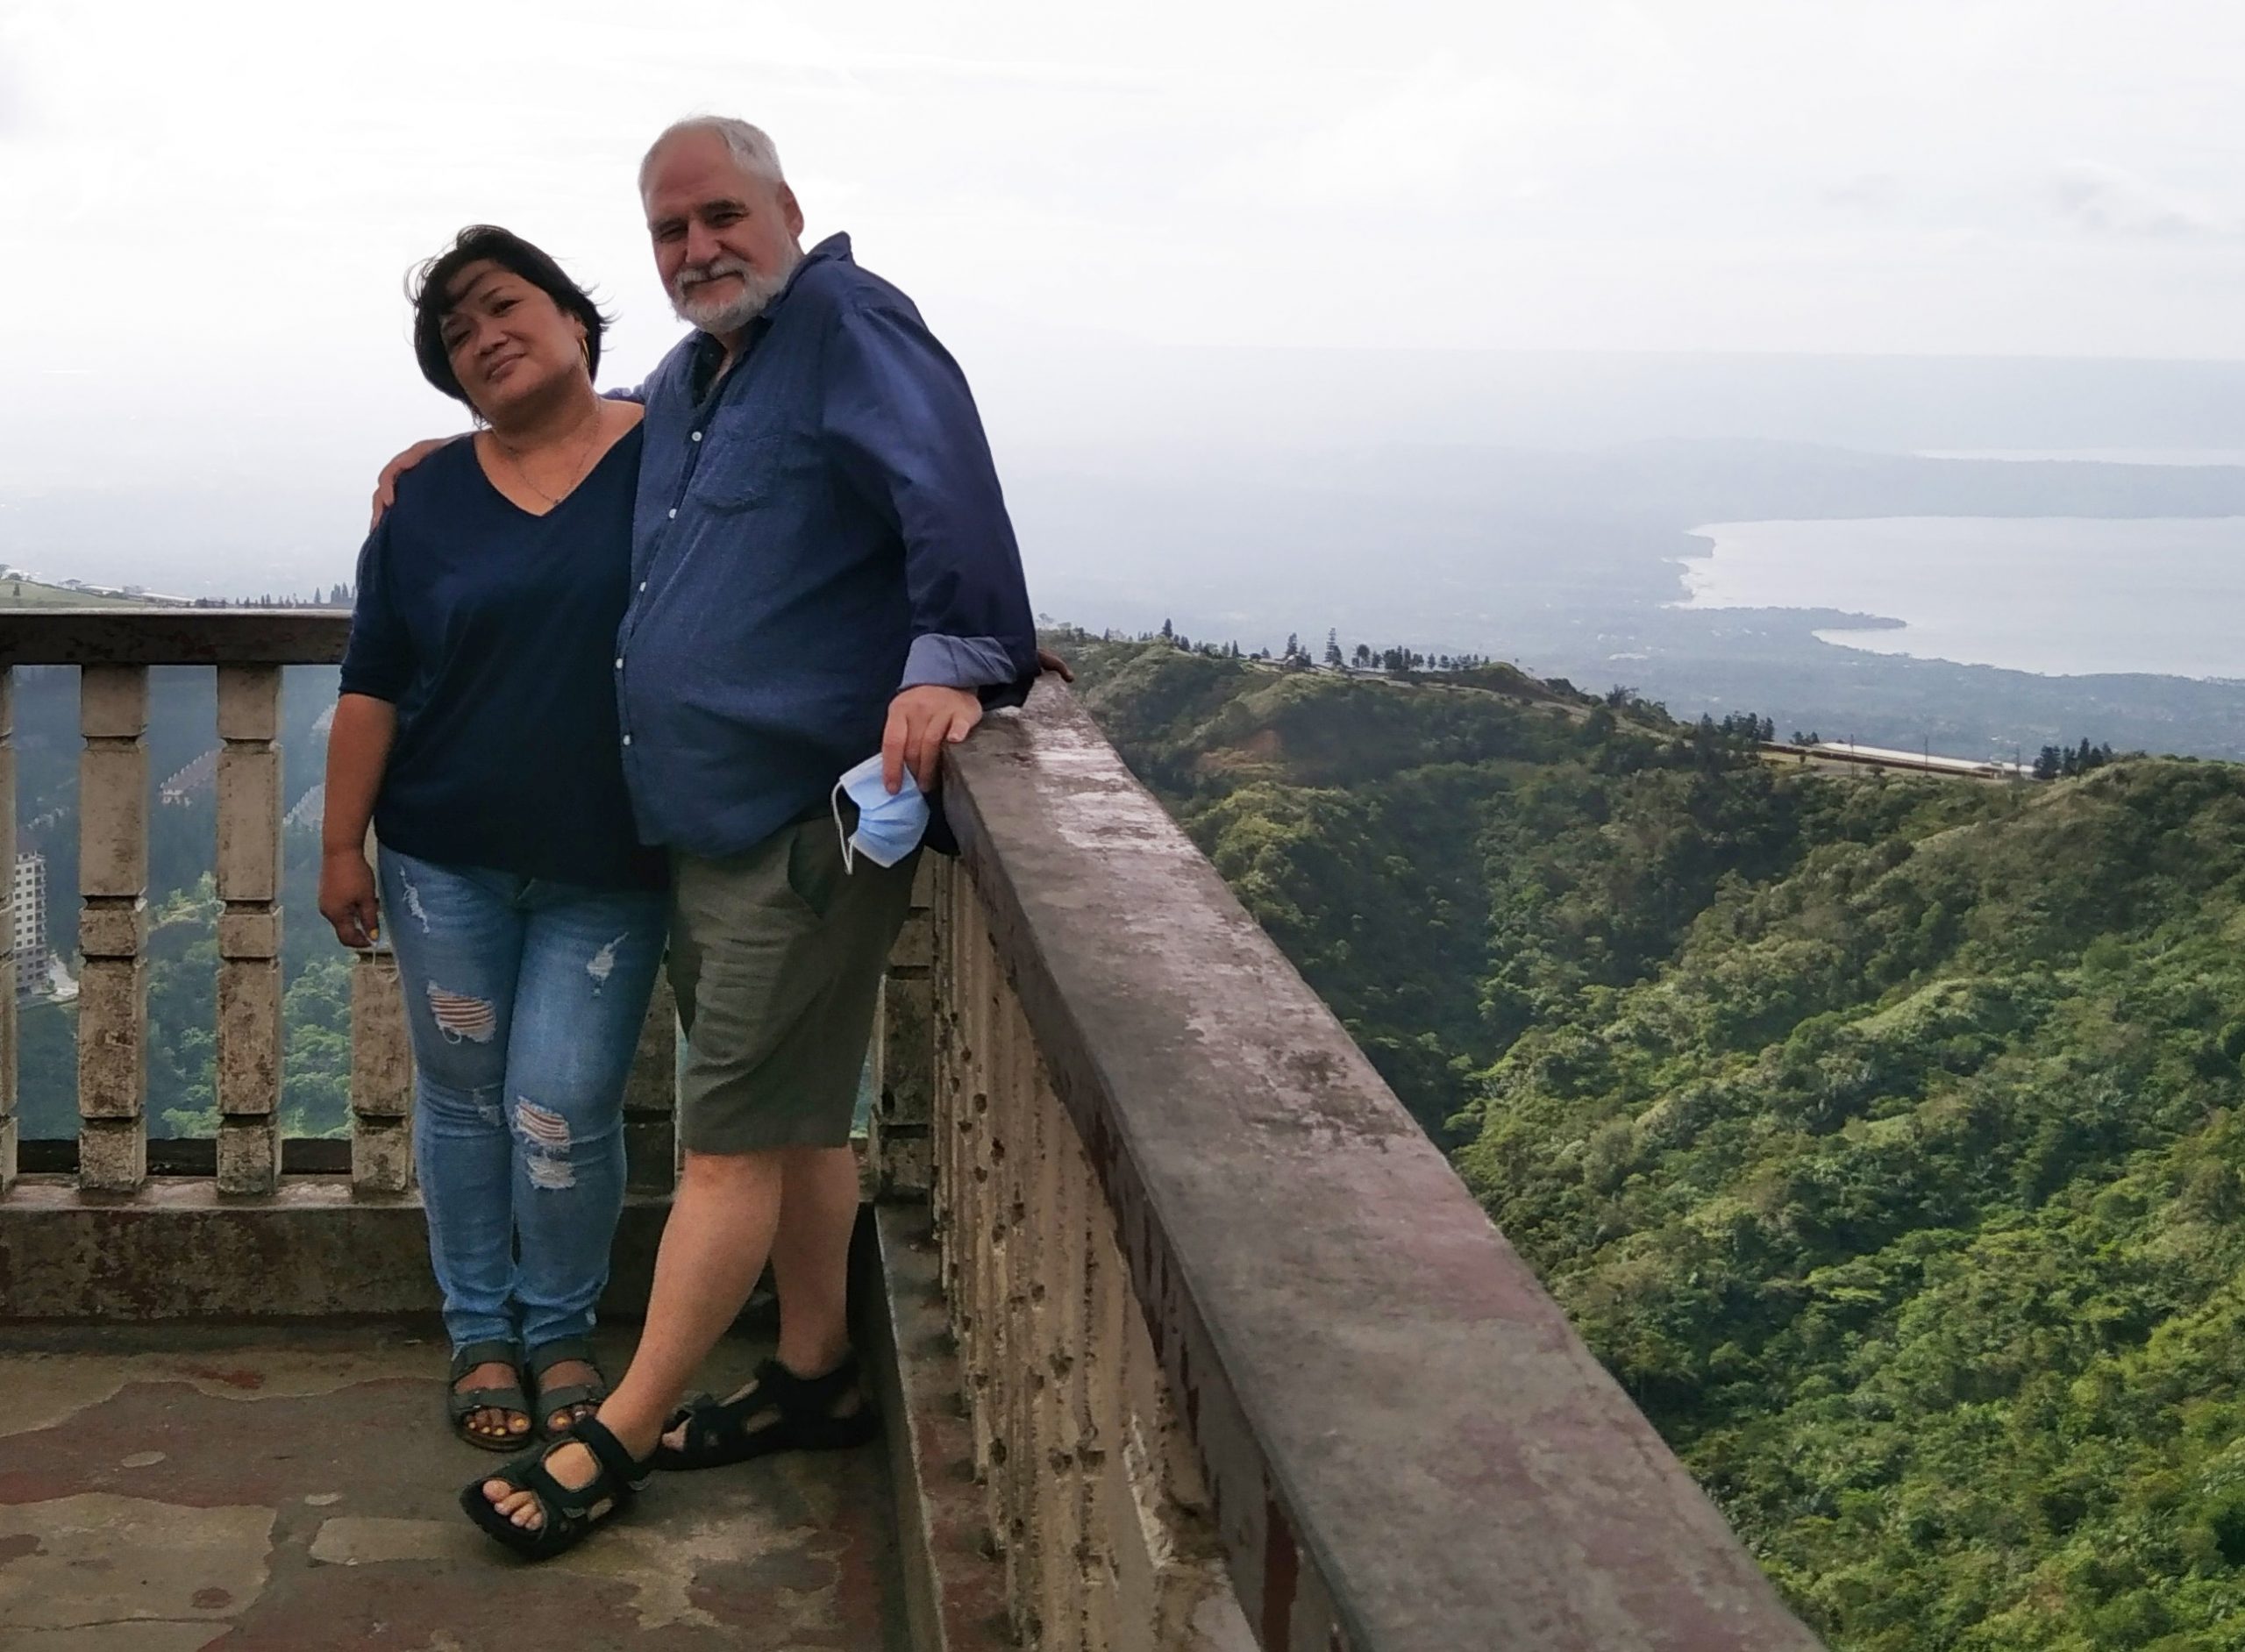 David and Edna at the Taal Volcano in Tagaytay 2022